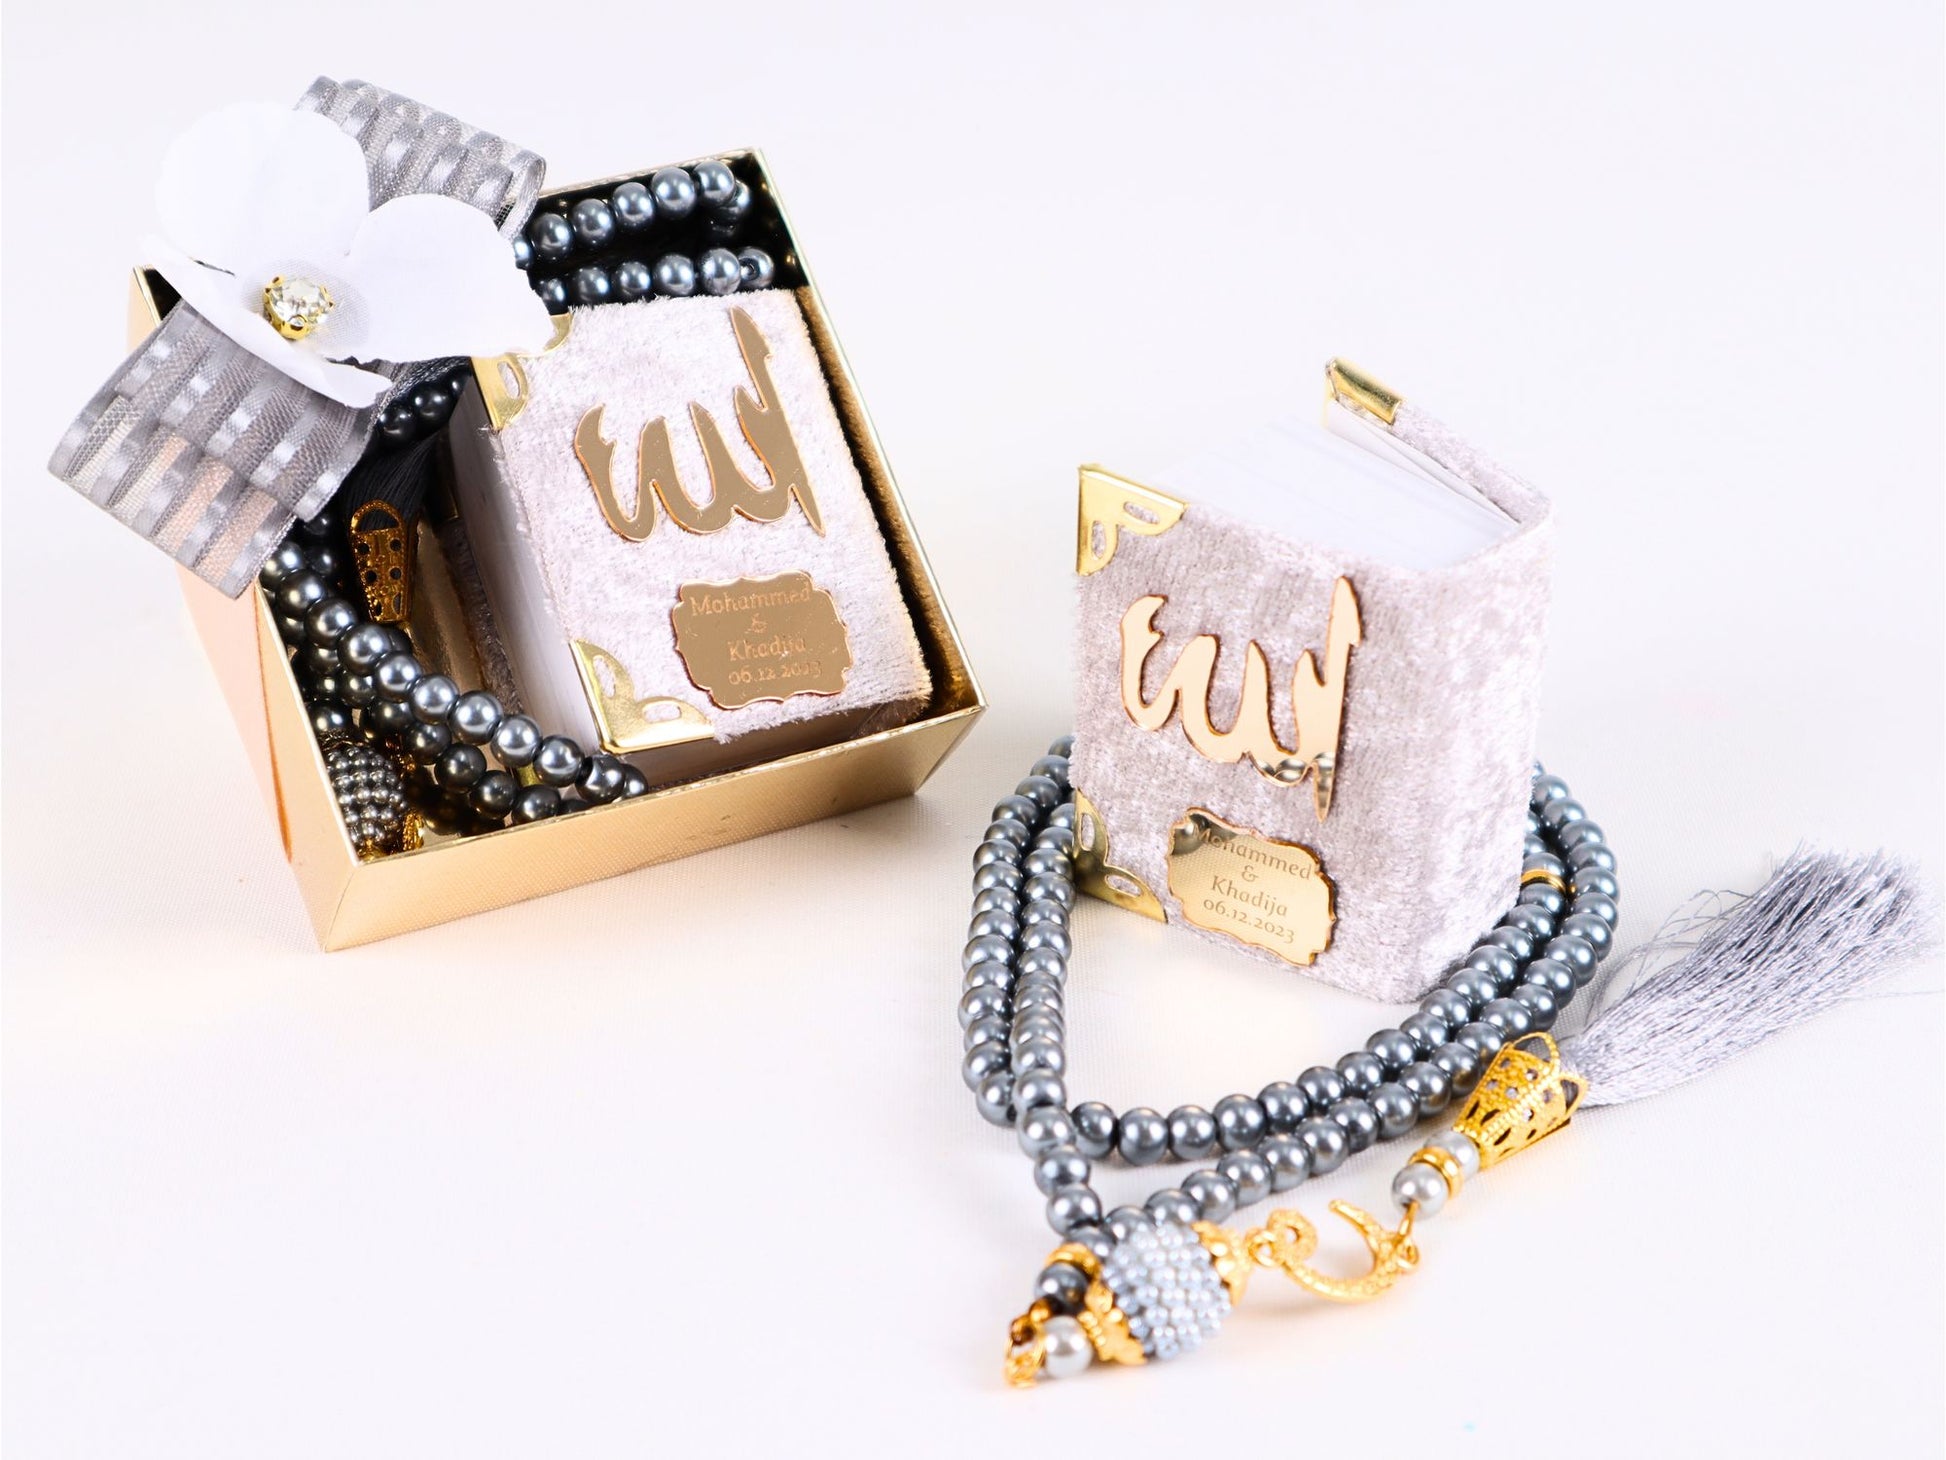 Personalized Mini Quran Pearl Prayer Beads Rose Décor Wedding Favor - Islamic Elite Favors is a handmade gift shop offering a wide variety of unique and personalized gifts for all occasions. Whether you're looking for the perfect Ramadan, Eid, Hajj, wedding gift or something special for a birthday, baby shower or anniversary, we have something for everyone. High quality, made with love.